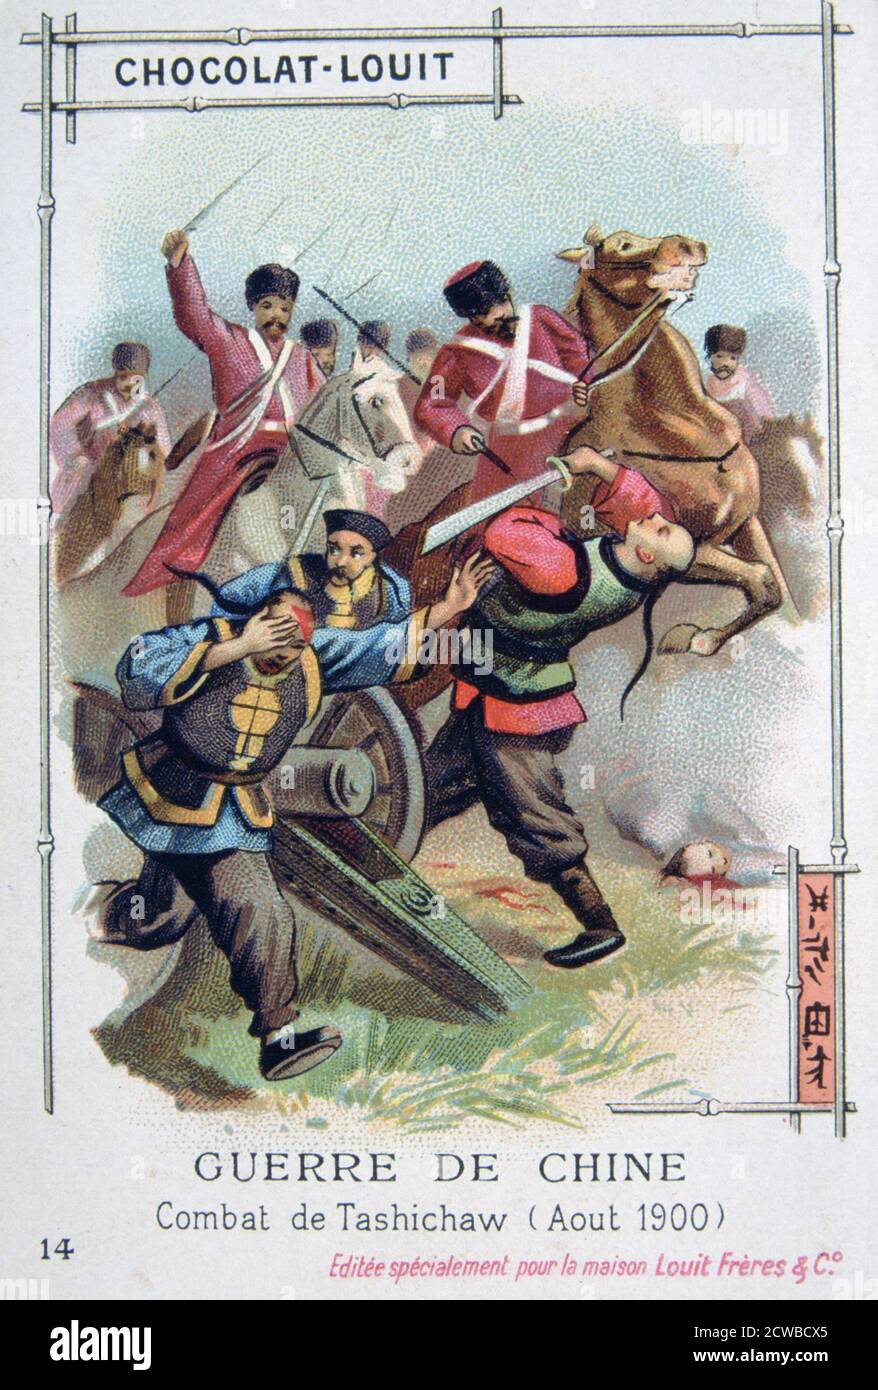 Battle at Tashichaw, China, Boxer Rebellion, August 1900. The Boxer Uprising or Boxer Rebellion was a Chinese rebellion from November 1899 to September 7, 1901 against foreign influence in trade, politics, religion and technology in China during the final years of the Qing Dynasty. The assassination of the German ambassador and the siege of foreign diplomatic legations in Peking prompted Britain, France, Germany, the US, Russia, Japan, Italy and Austria-Hungary to form the Eight Nation Alliance and intervene militarily. French trading card advertising Chocolat-Louit. The artist is unknown. Stock Photo